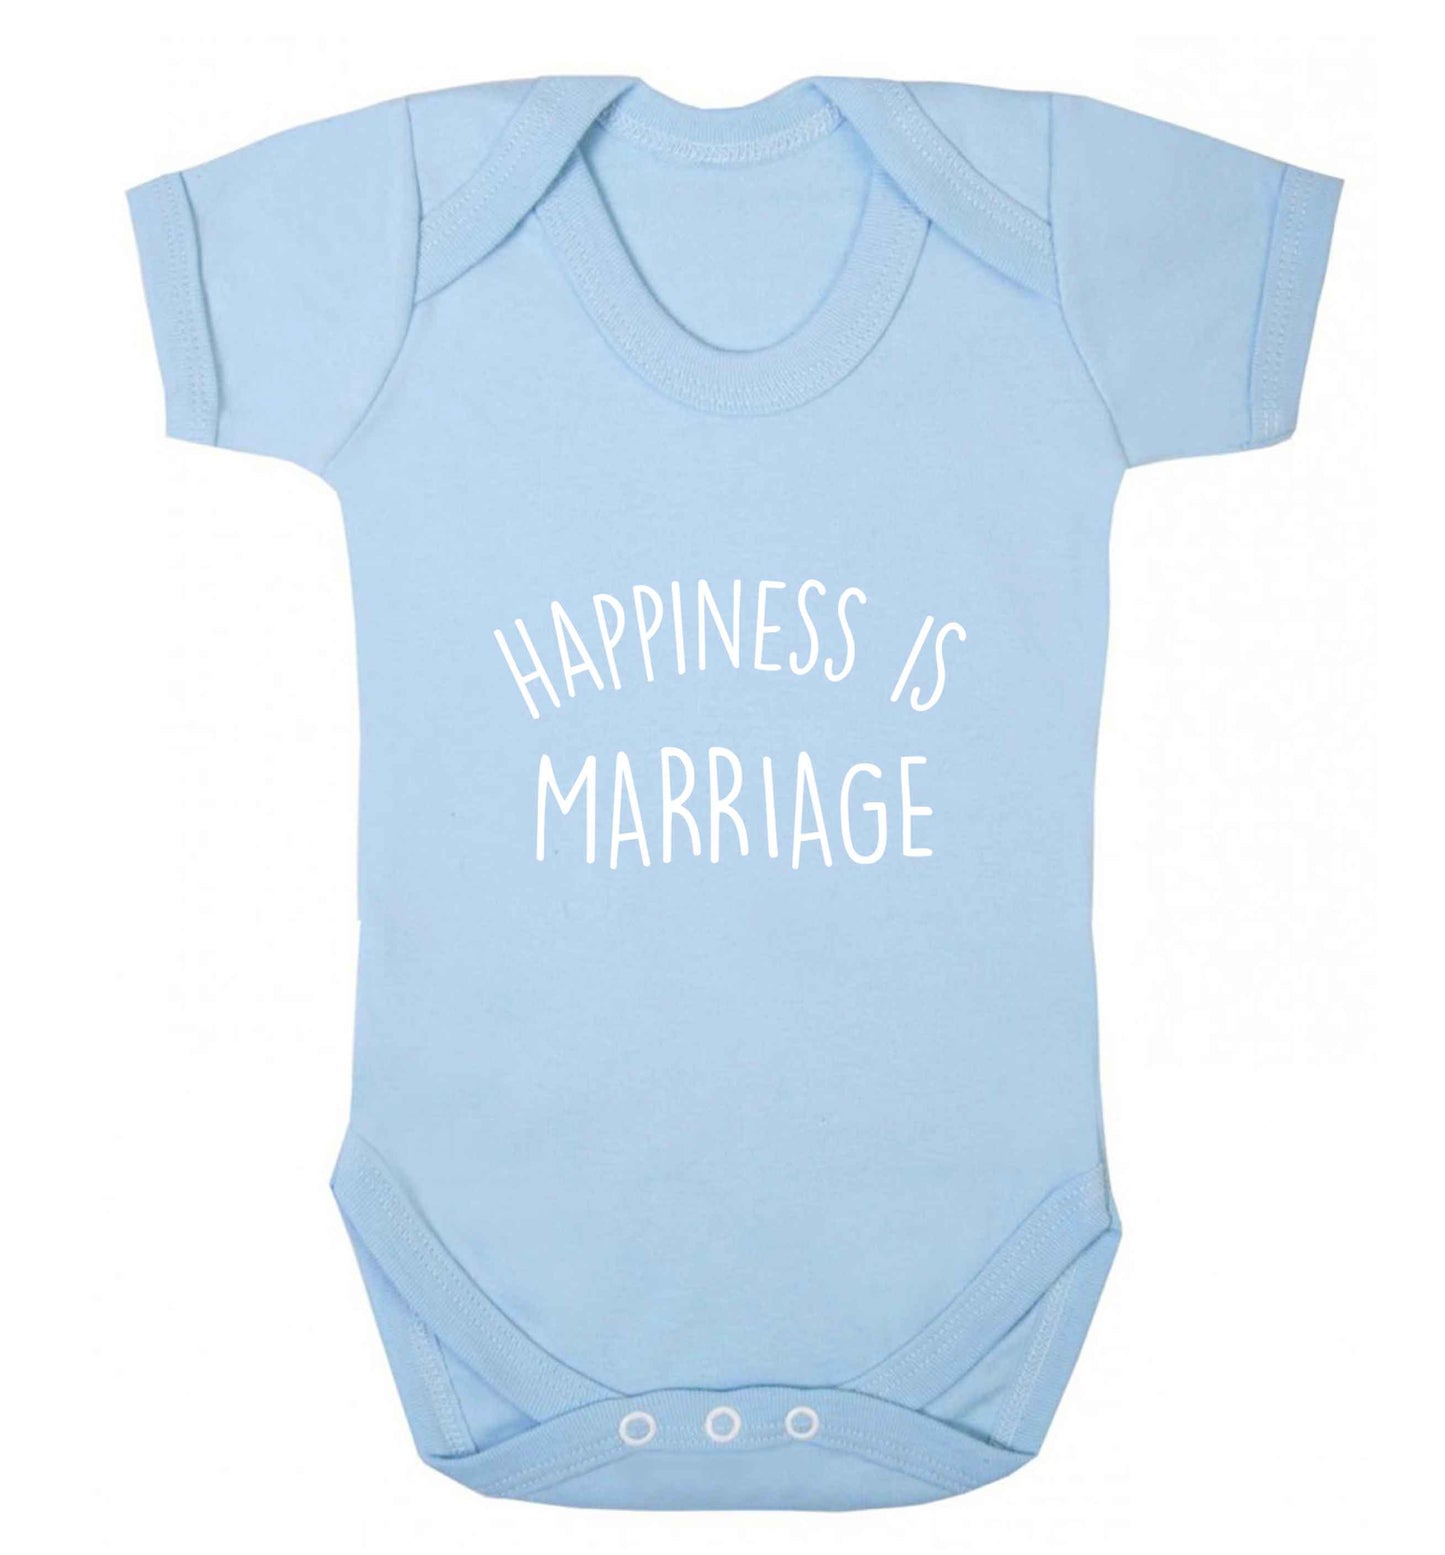 Happiness is marriage baby vest pale blue 18-24 months